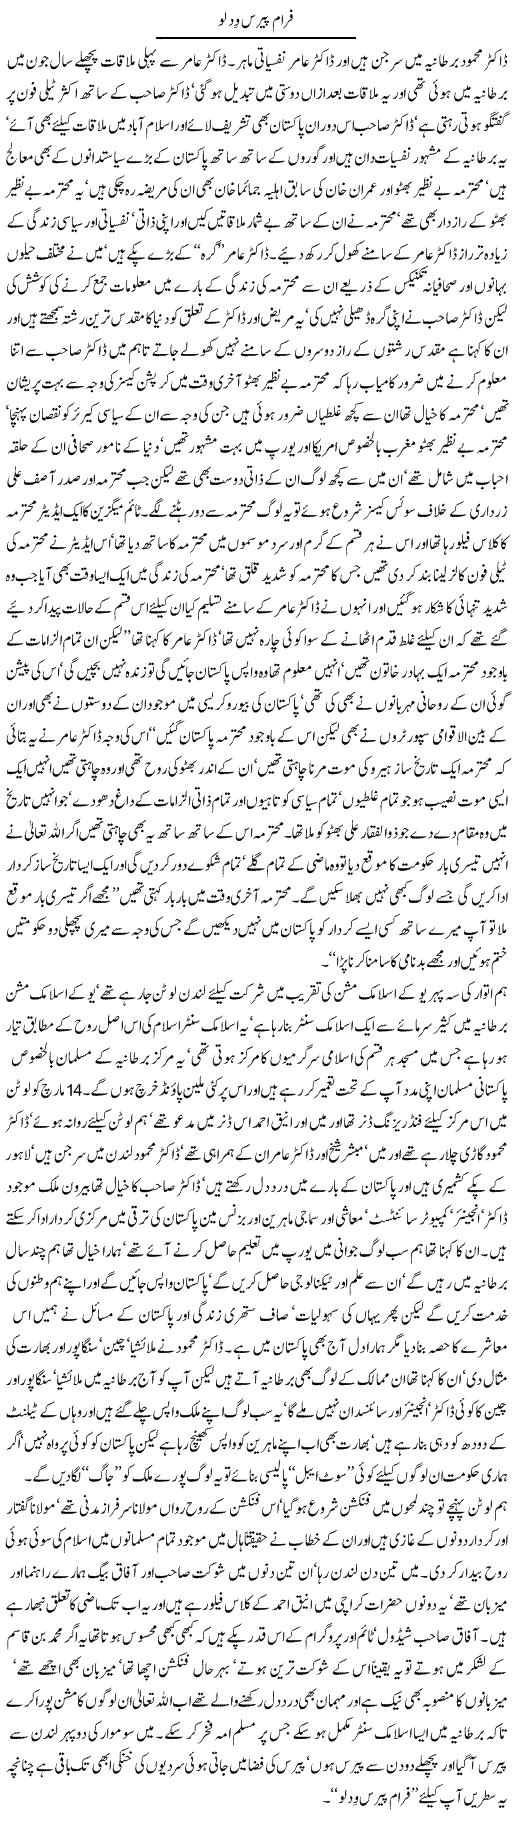 From Paris with love Express column Javed Chaudhary 18 March 2010